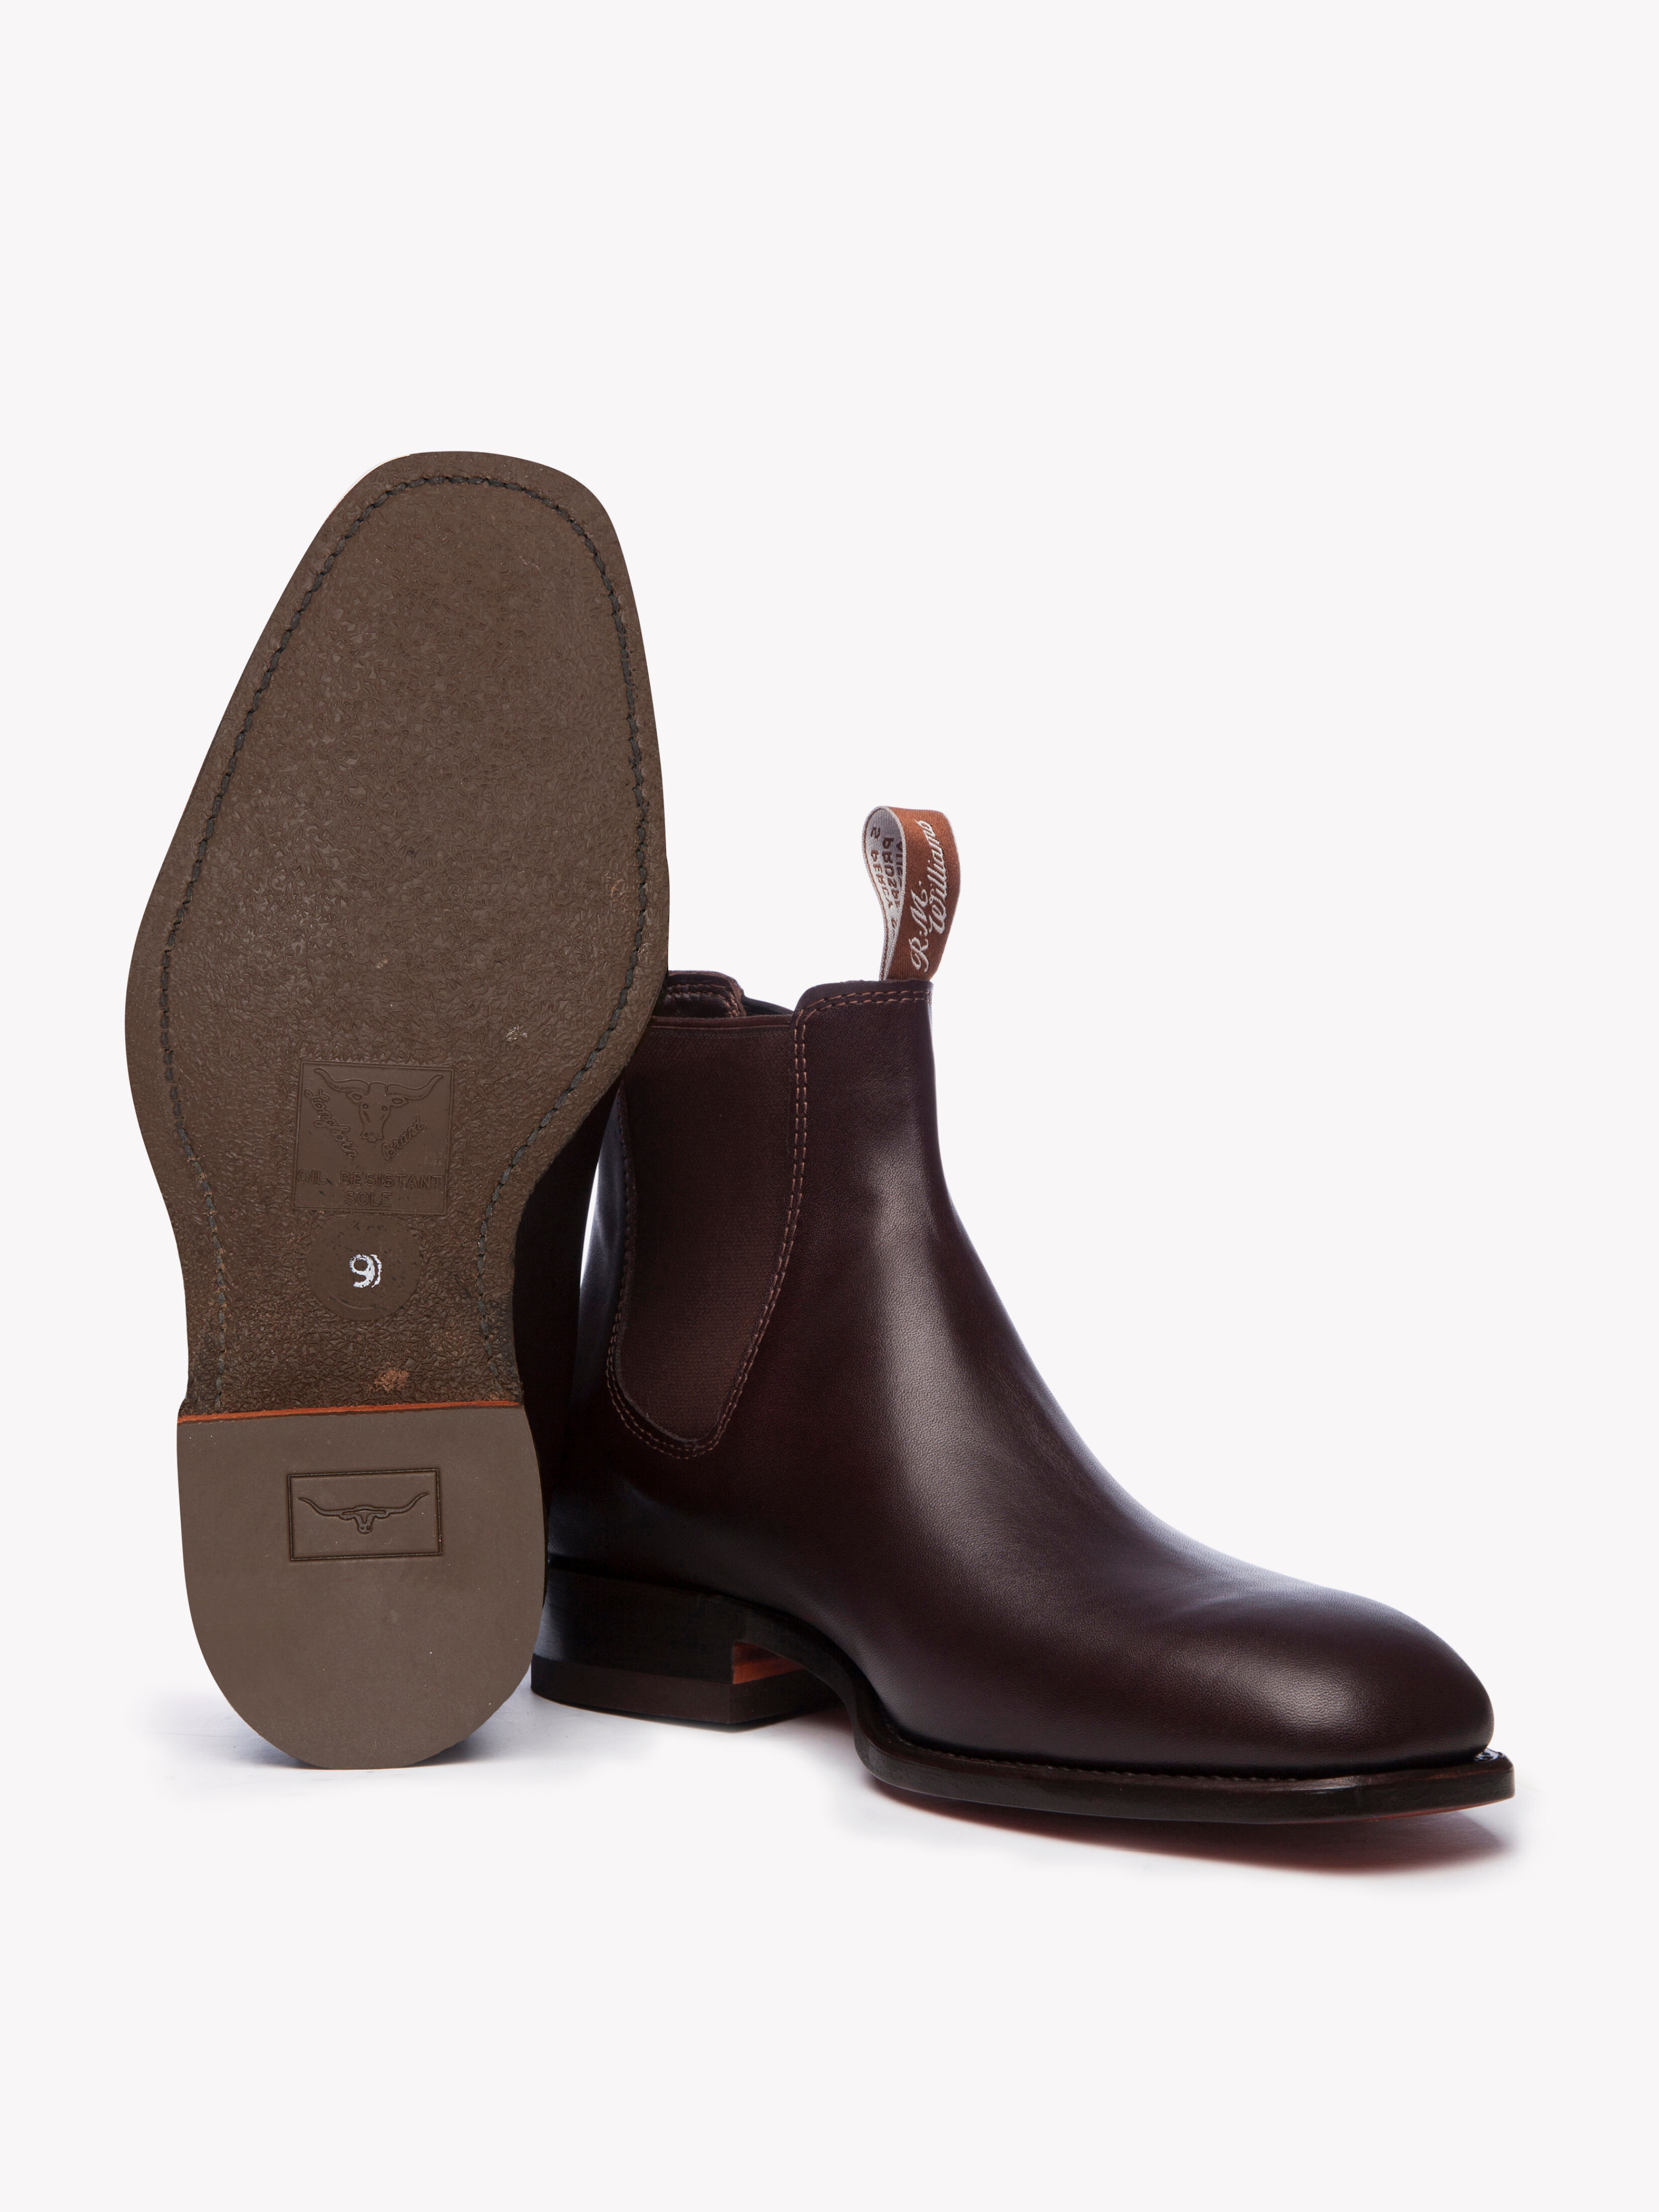 rm williams baby boots